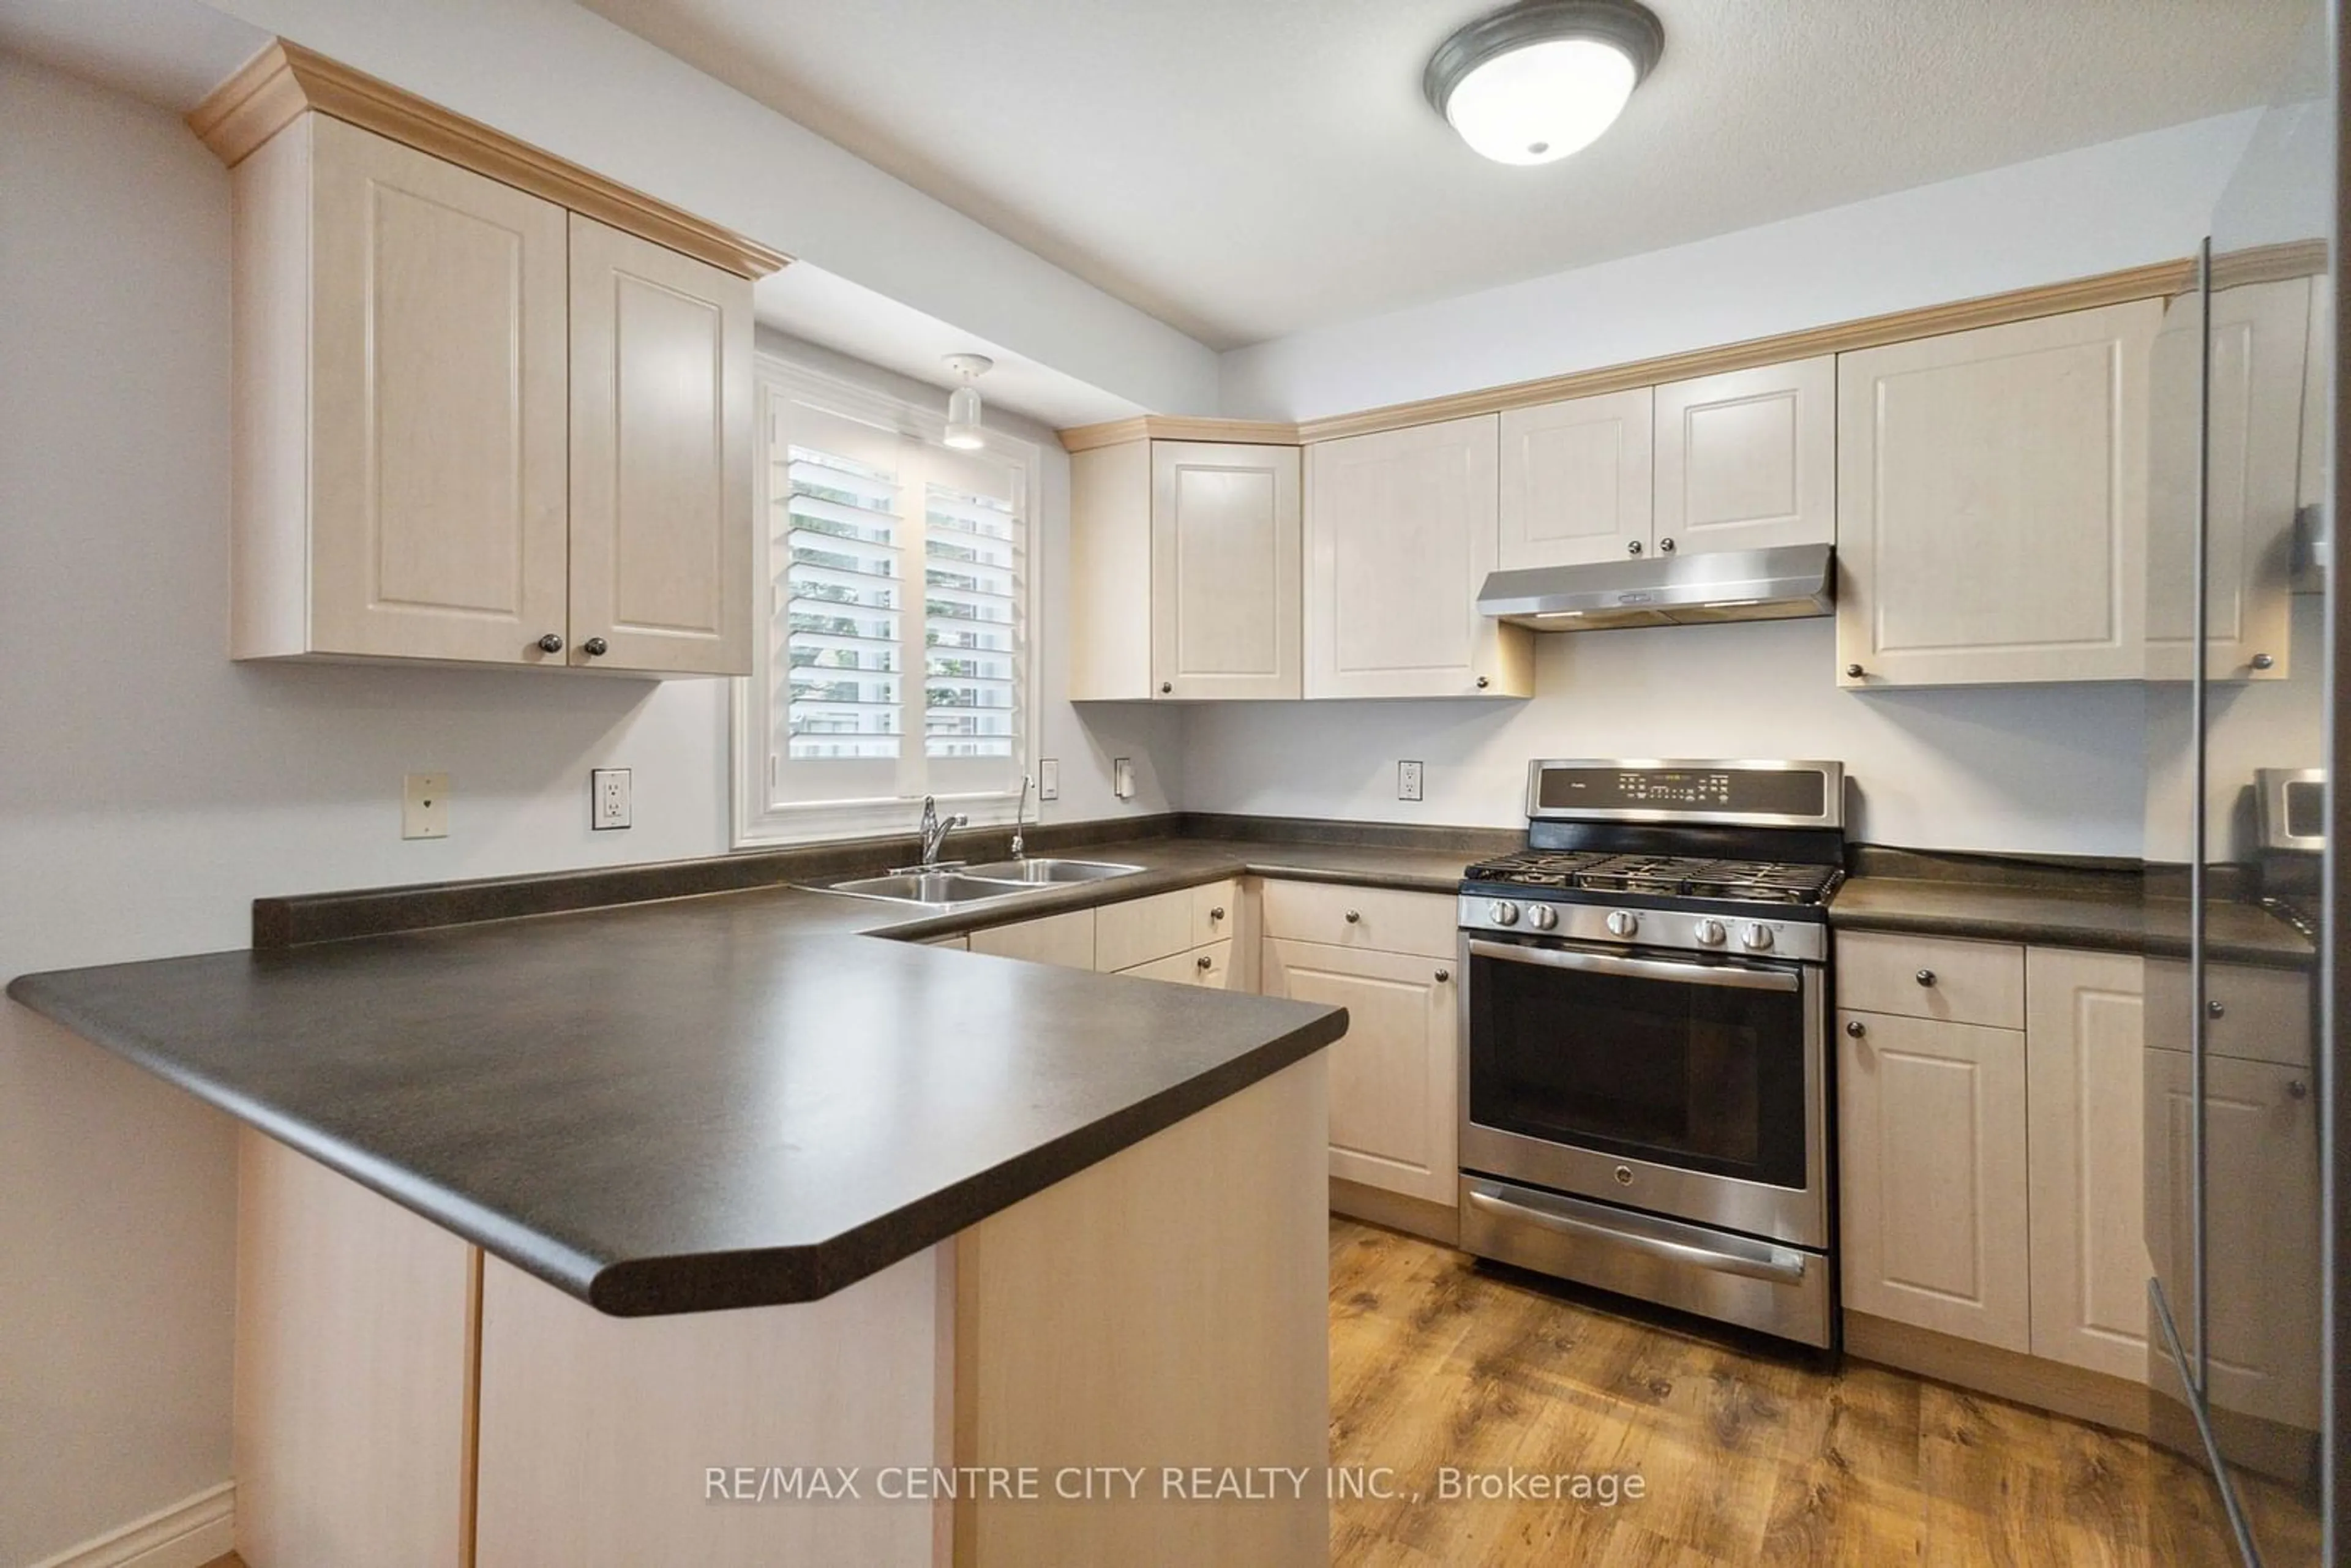 Standard kitchen for 71 Meadowsweet Cres, Middlesex Centre Ontario N0M 2A0